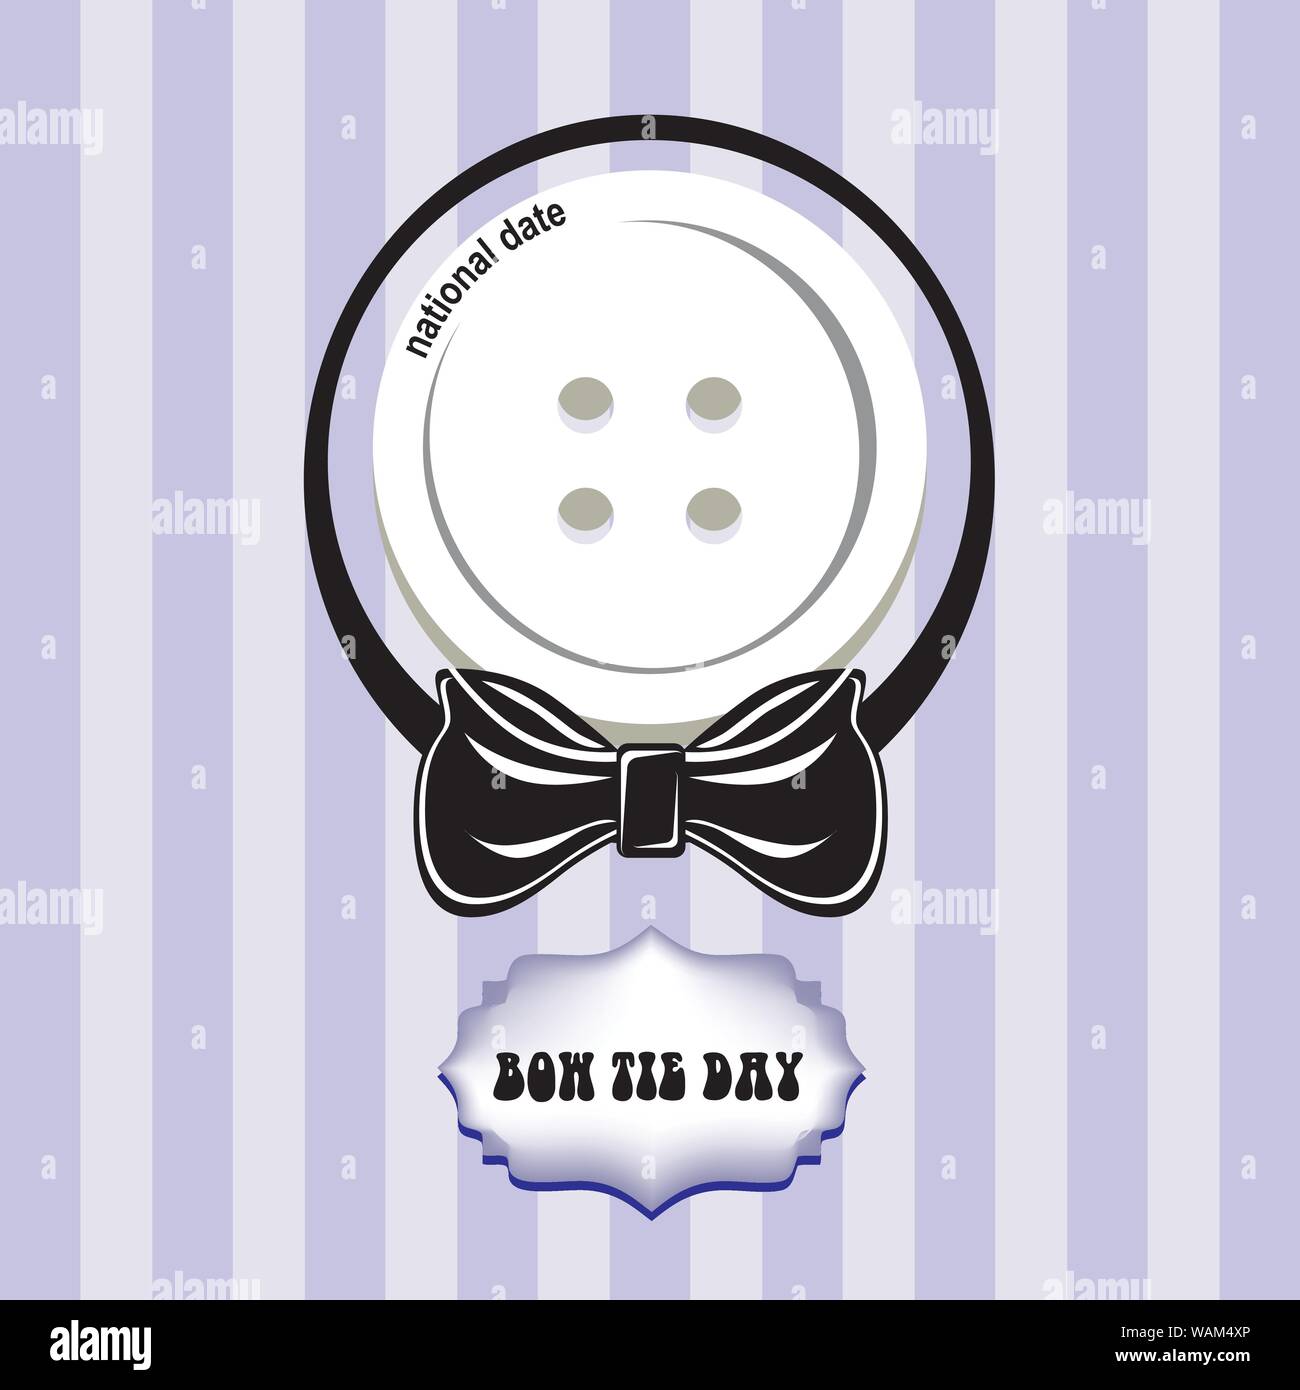 The national holiday is Bow Tie Day, celebrated in August. Male butterfly in the old classic version. Stock Vector